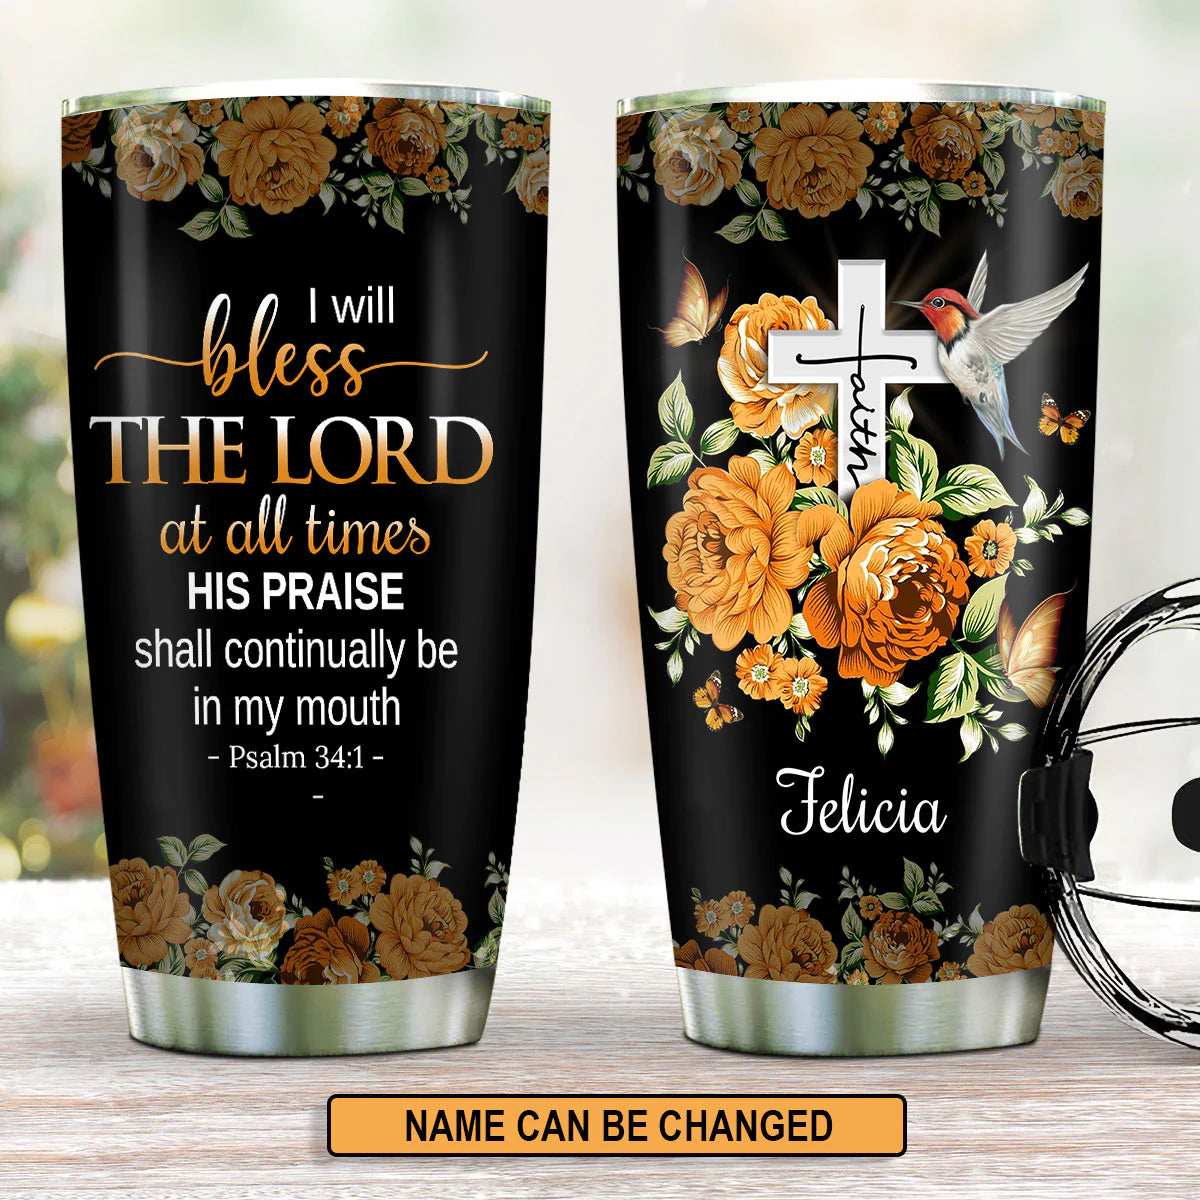 Christianartbag Drinkware, I Will Bless The Lord, Personalized Mug, Tumbler, Personalized Gift. - Christian Art Bag